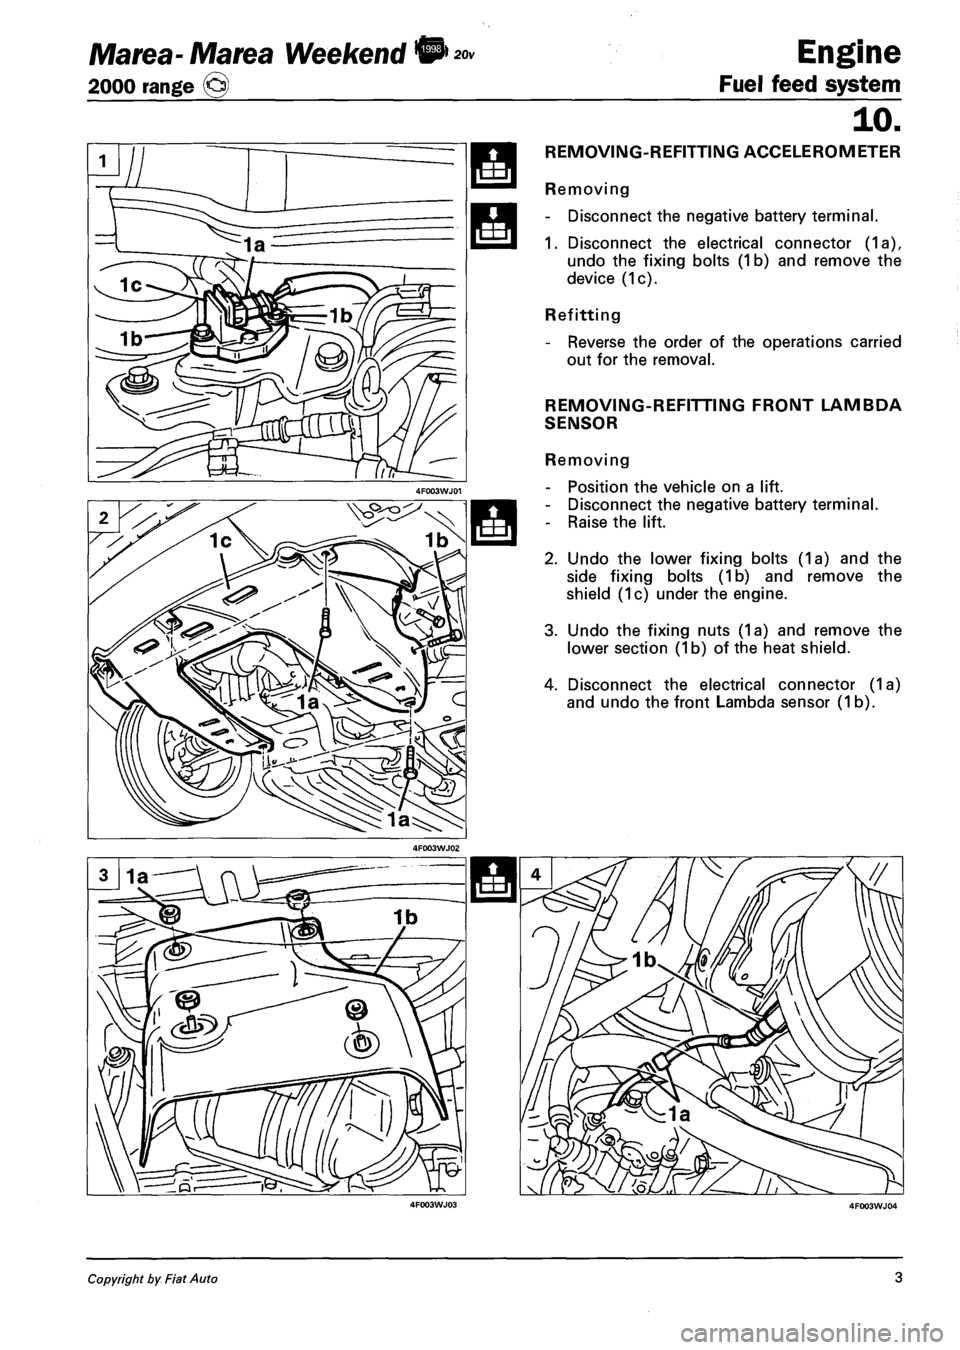 FIAT MAREA 2000 1.G Manual PDF Marea- Marea Weekend • 
2000 range © 
Engine 
Fuel feed system 
10. 
REMOVING-REFITTING ACCELEROMETER 
Removing 
- Disconnect the negative battery terminal. 
1. Disconnect the electrical connector 